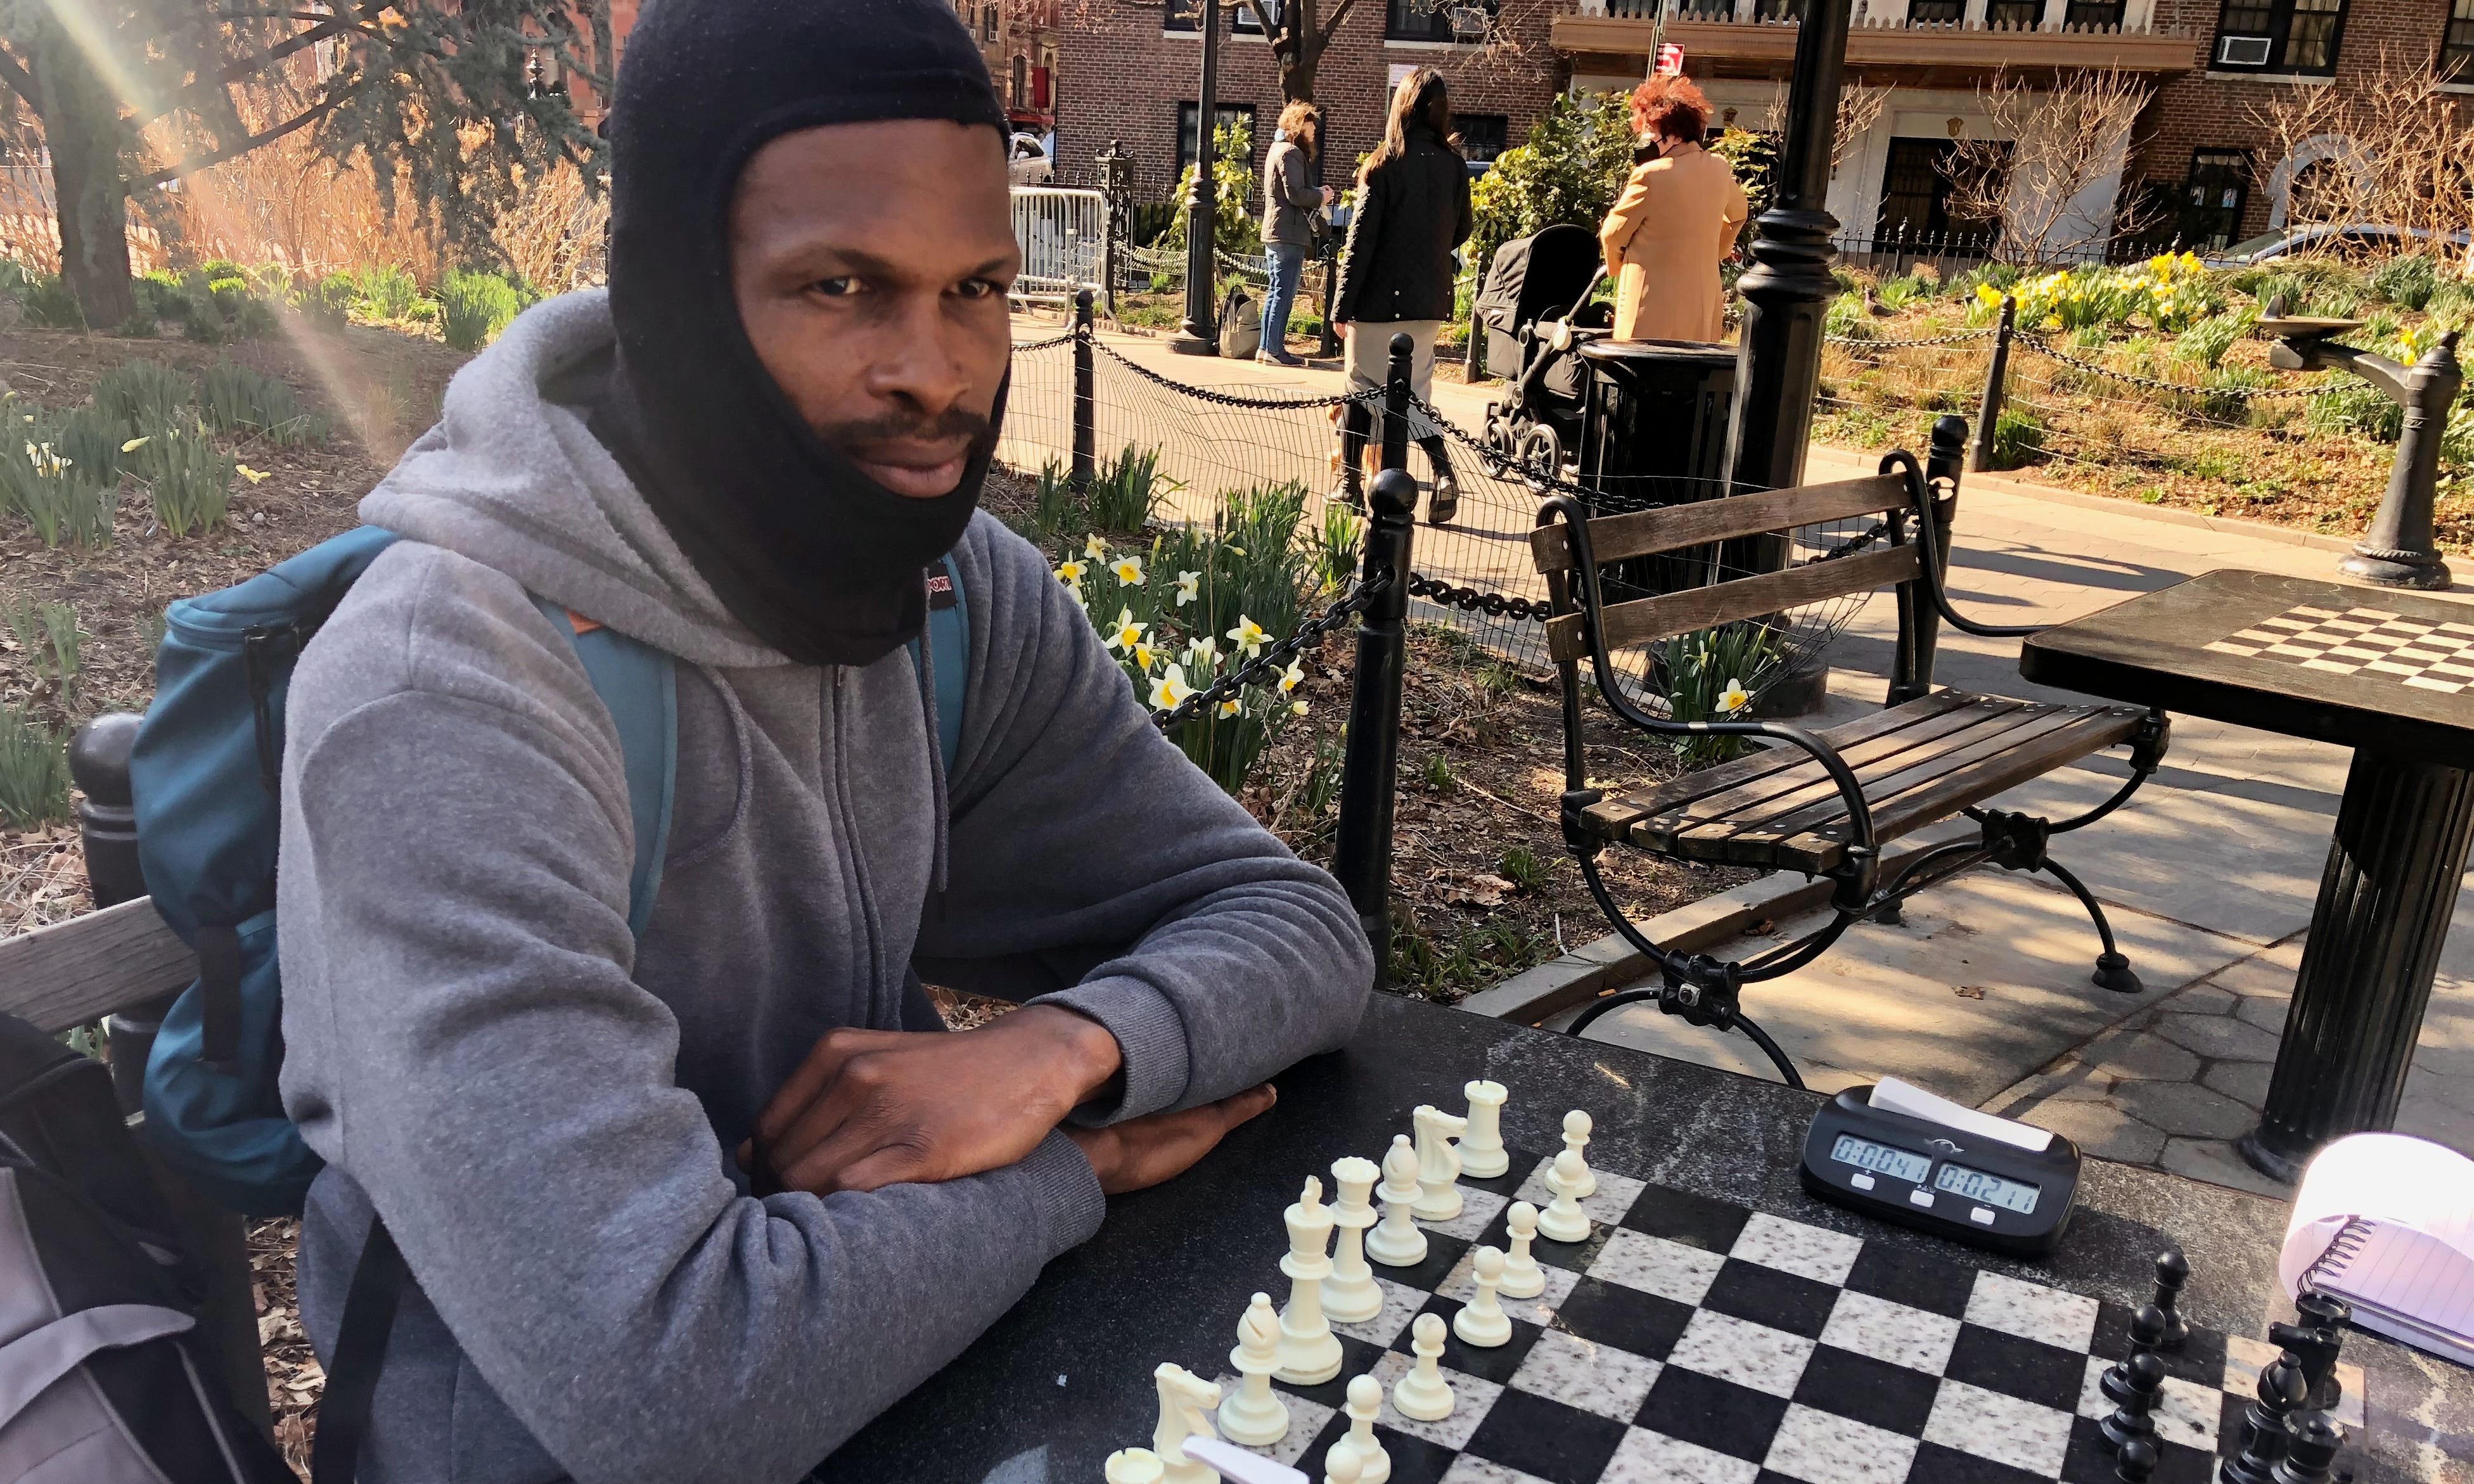 Can a street chess player who plays for money win against